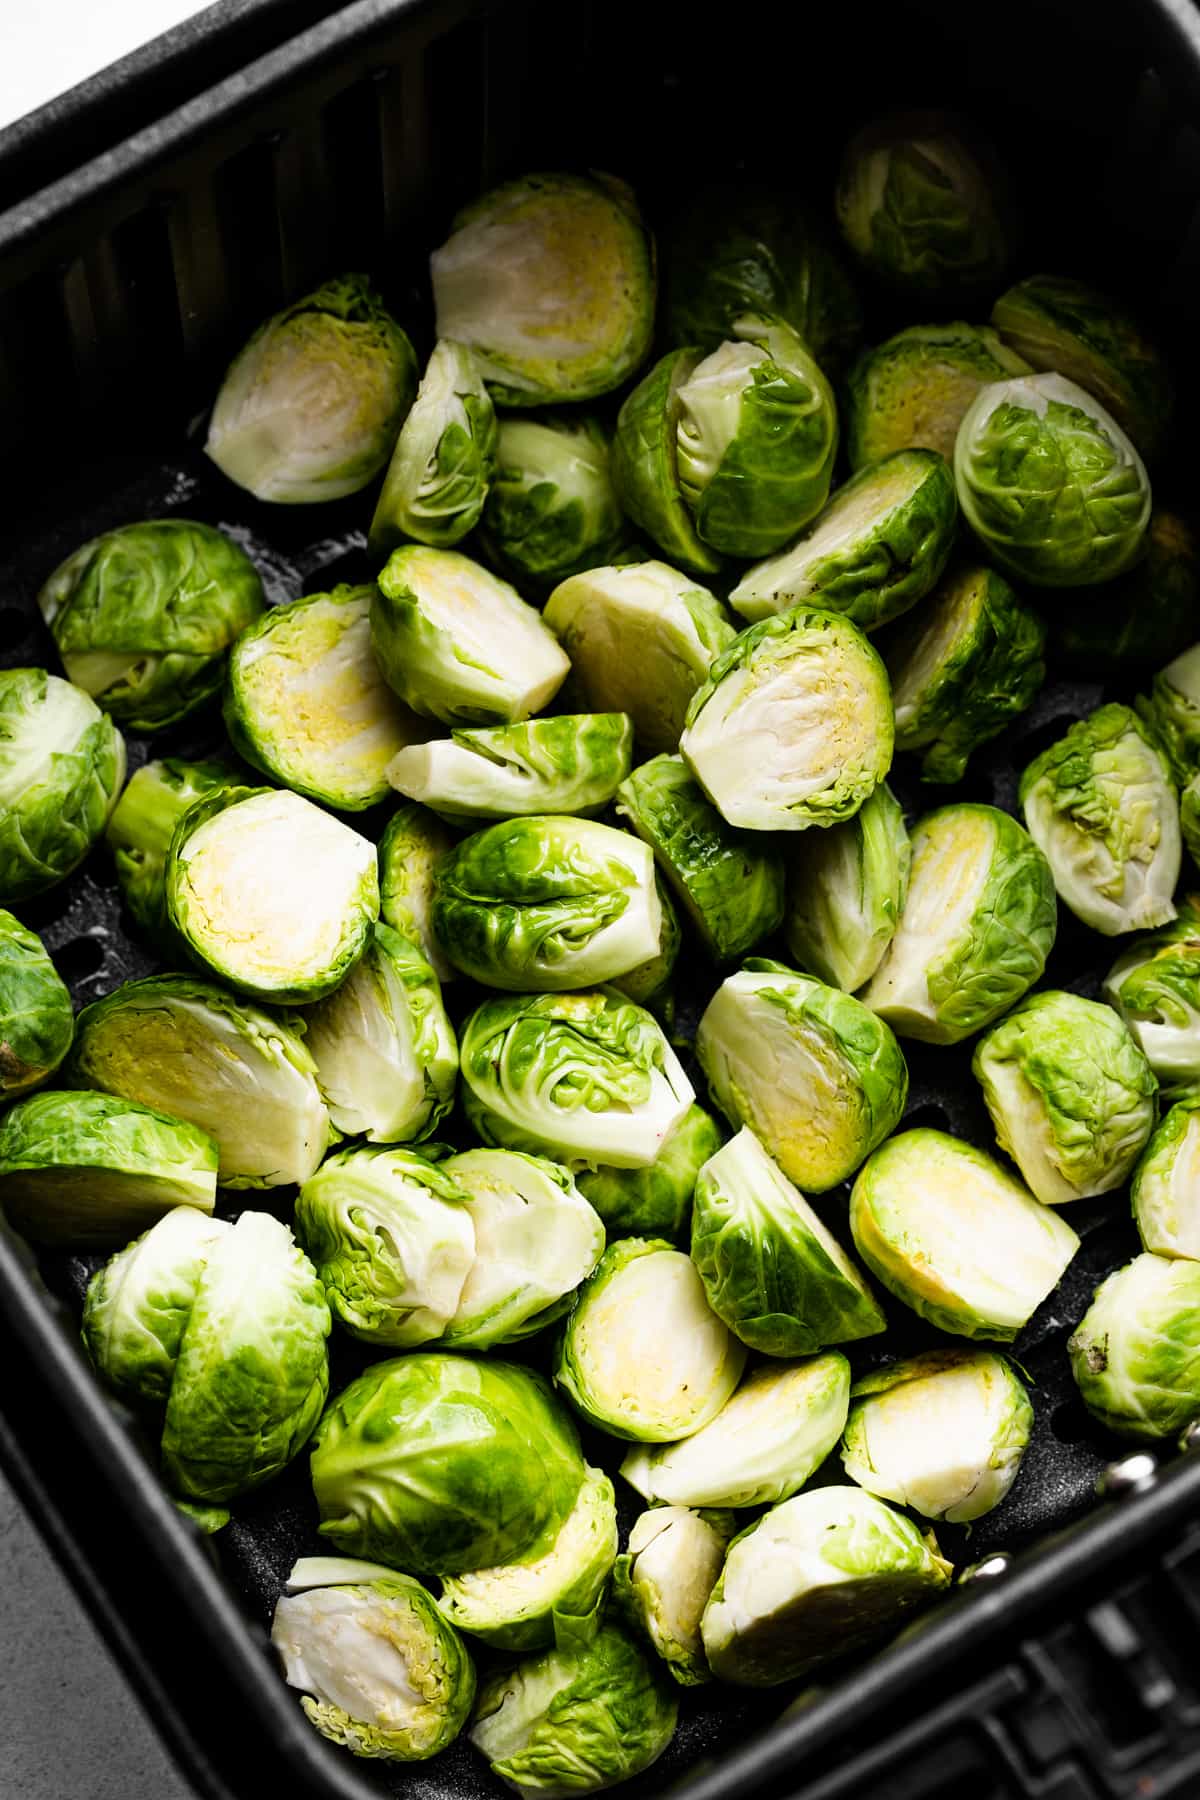 Raw brussel sprouts in an air fryer basket